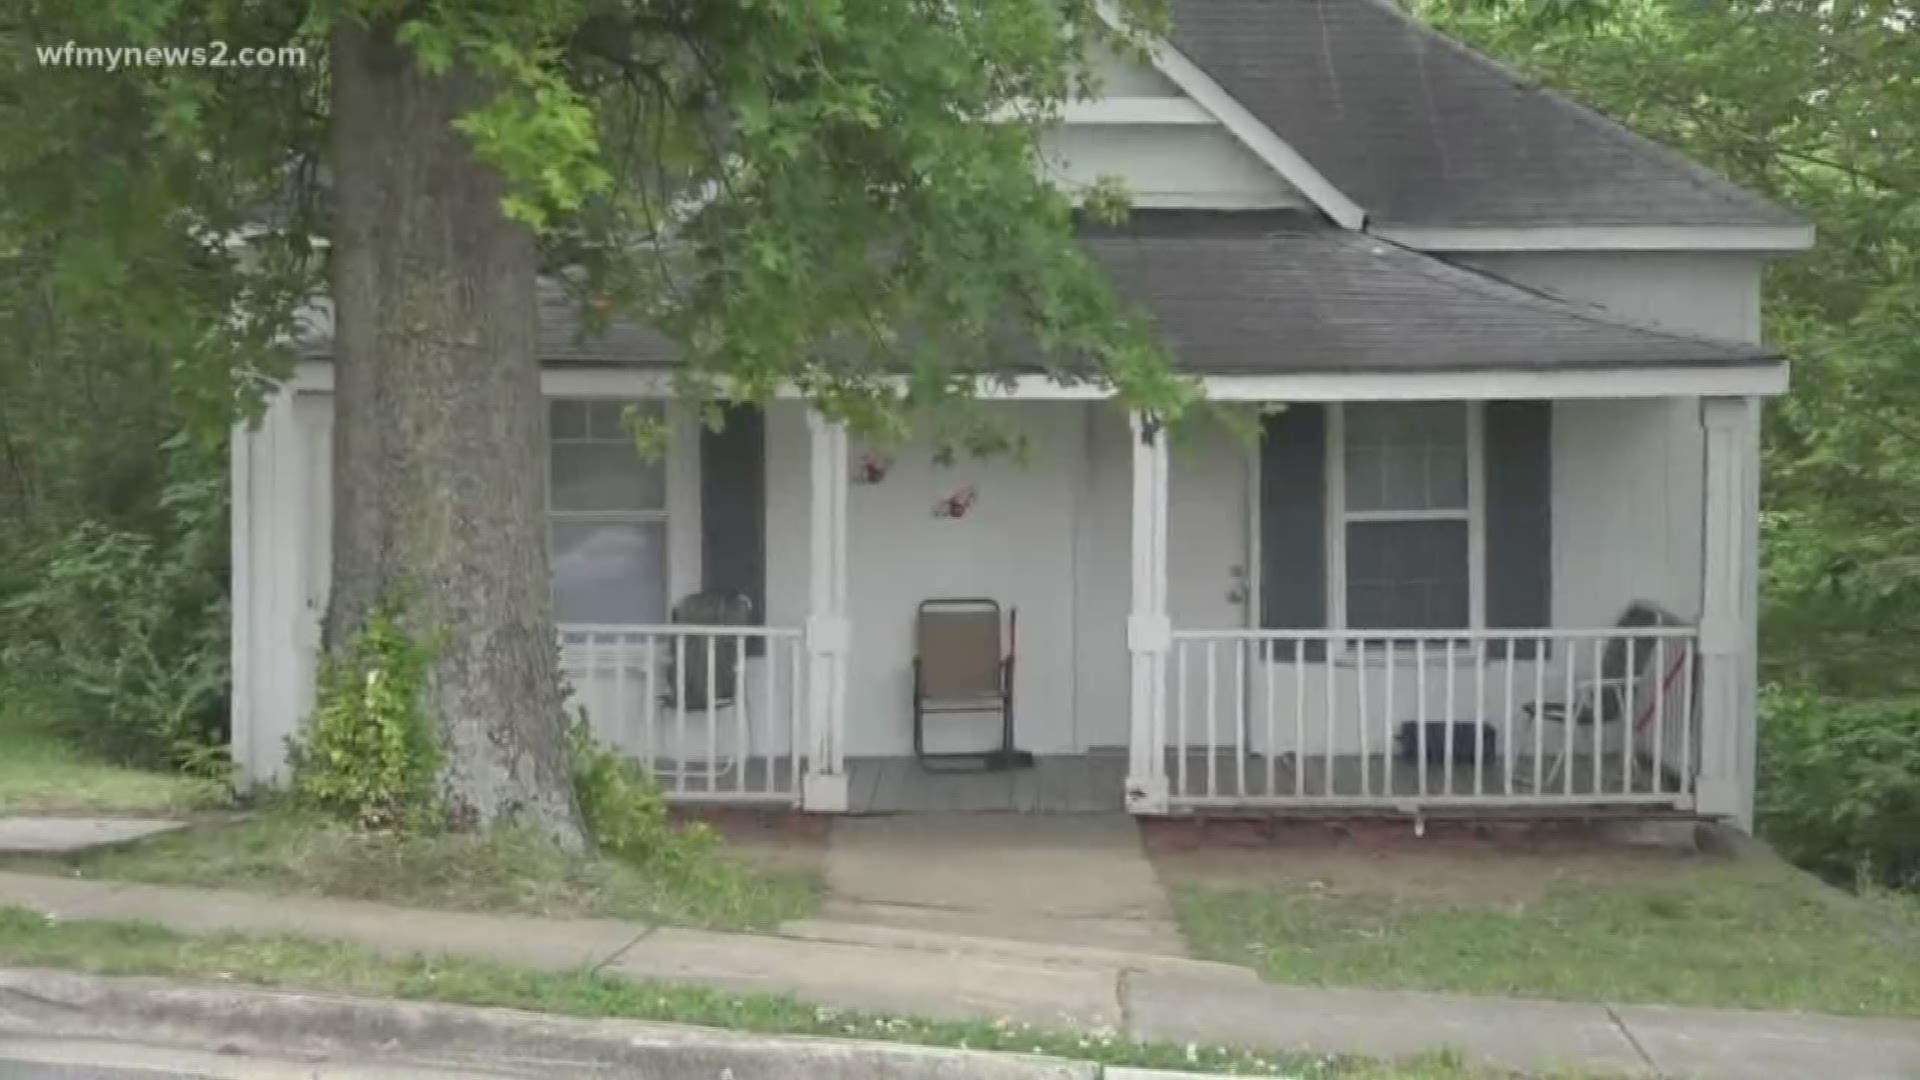 A 7-year-old girl was shot twice in High Point while playing on the front porch of a home Monday night.